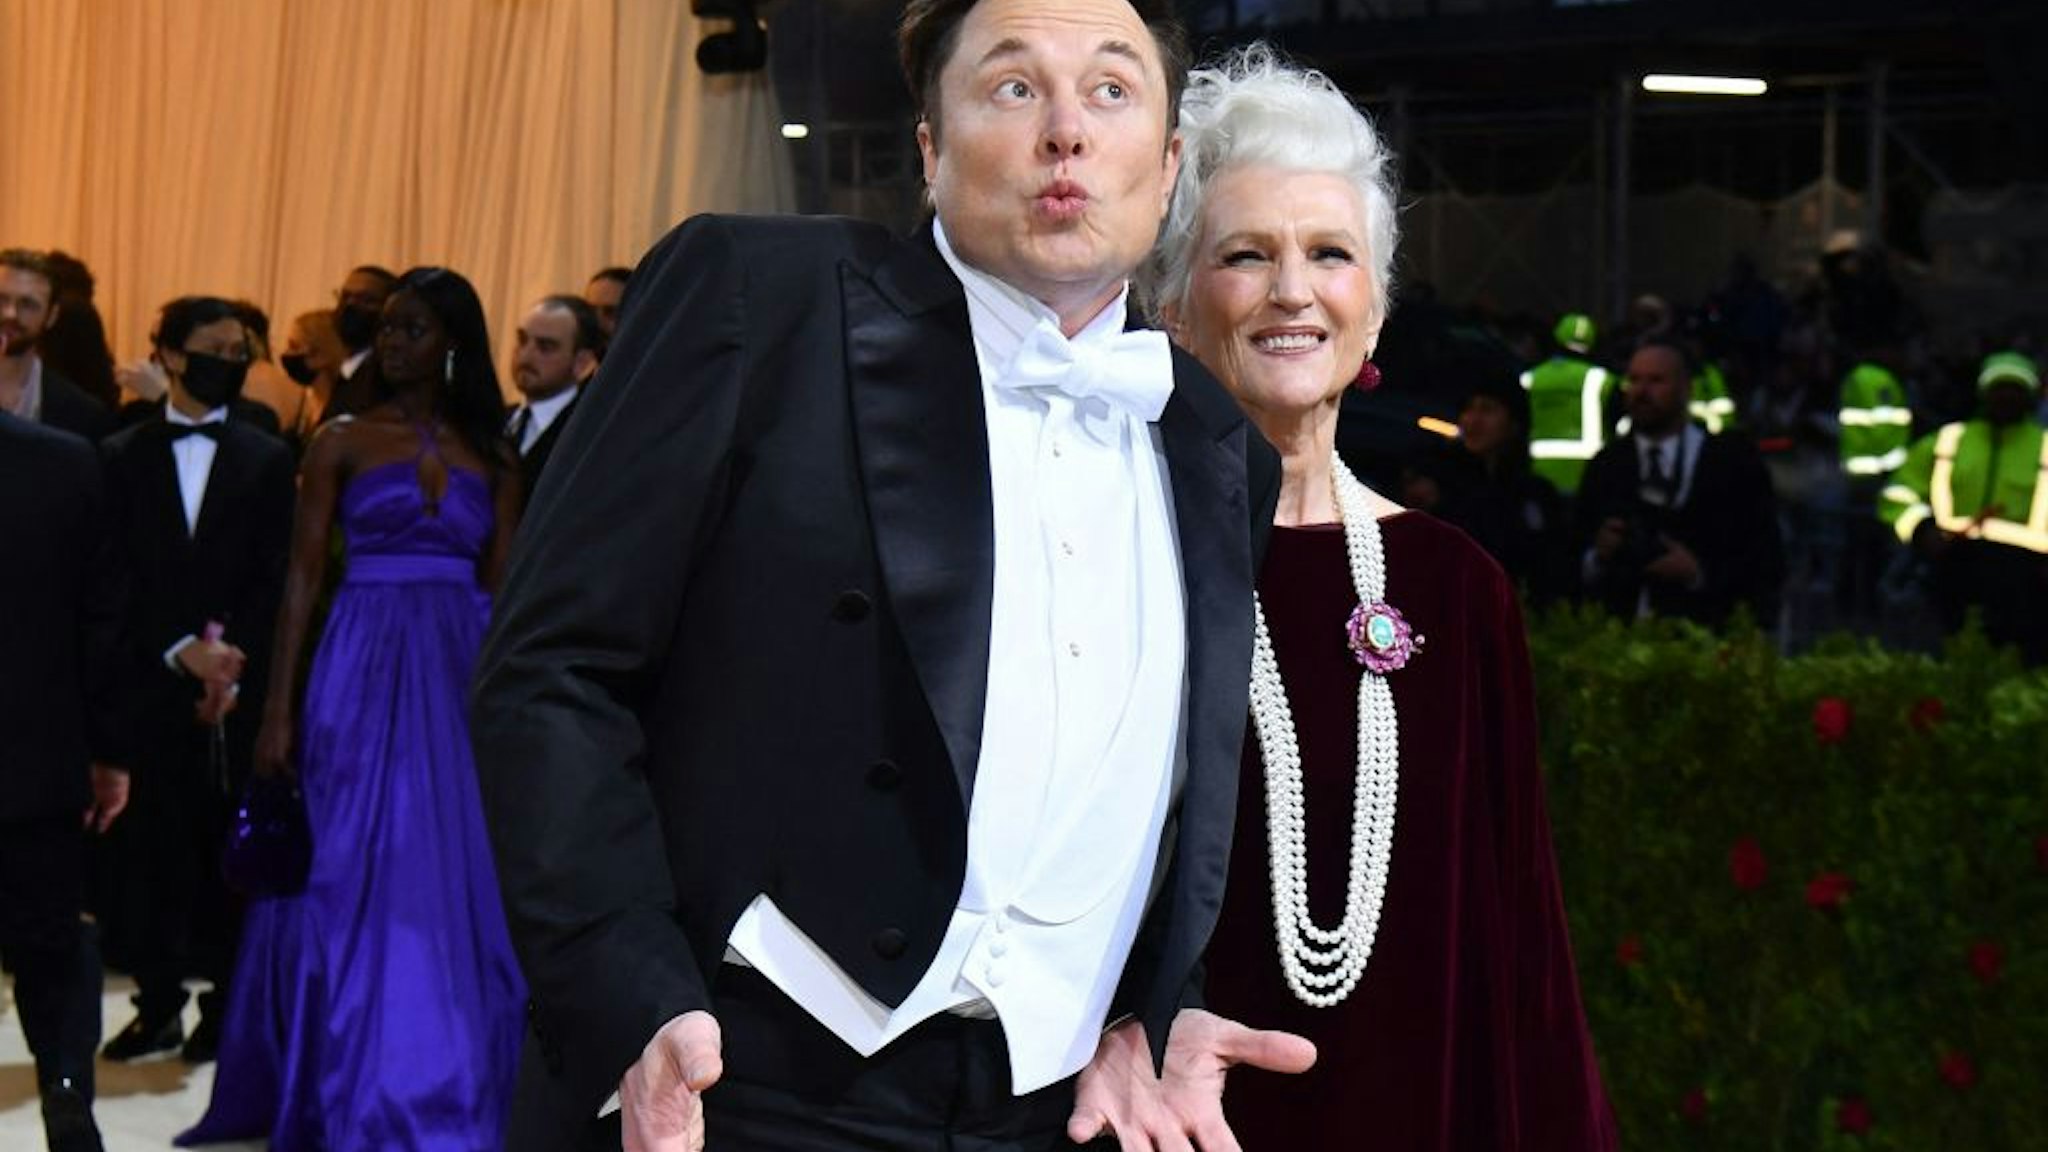 TOPSHOT - CEO, and chief engineer at SpaceX, Elon Musk and his mother, supermodel Maye Musk, arrive for the 2022 Met Gala at the Metropolitan Museum of Art on May 2, 2022, in New York. - The Gala raises money for the Metropolitan Museum of Art's Costume Institute. The Gala's 2022 theme is "In America: An Anthology of Fashion". (Photo by ANGELA WEISS / AFP) (Photo by ANGELA WEISS/AFP via Getty Images)